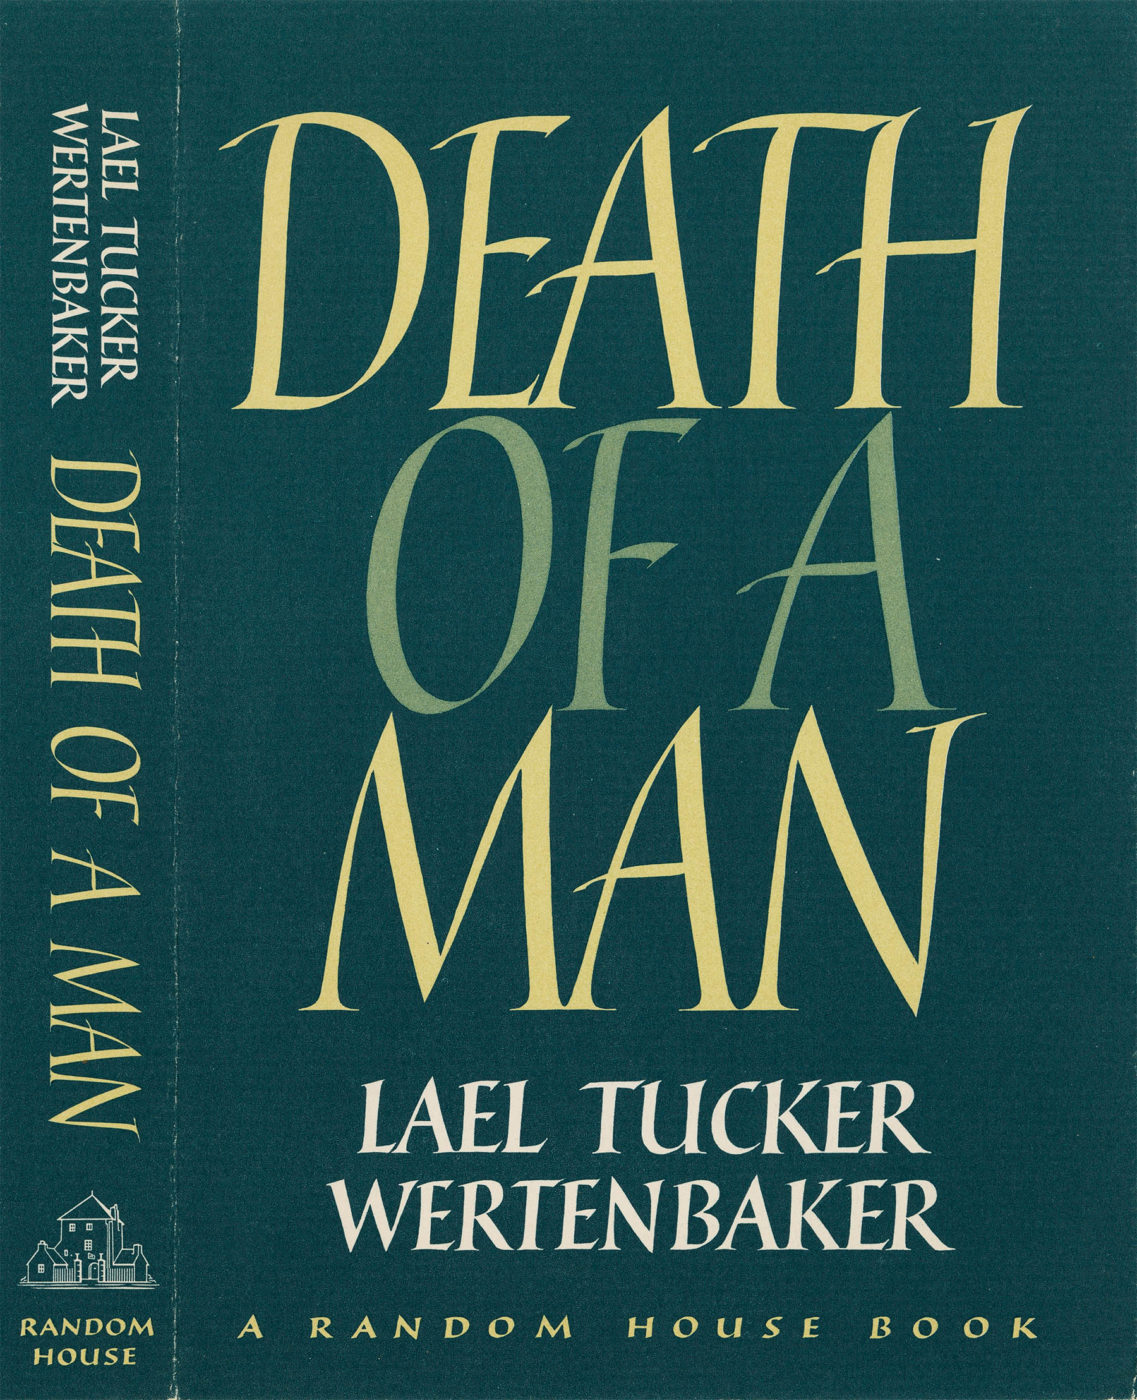 Book jacket of Death of a Man